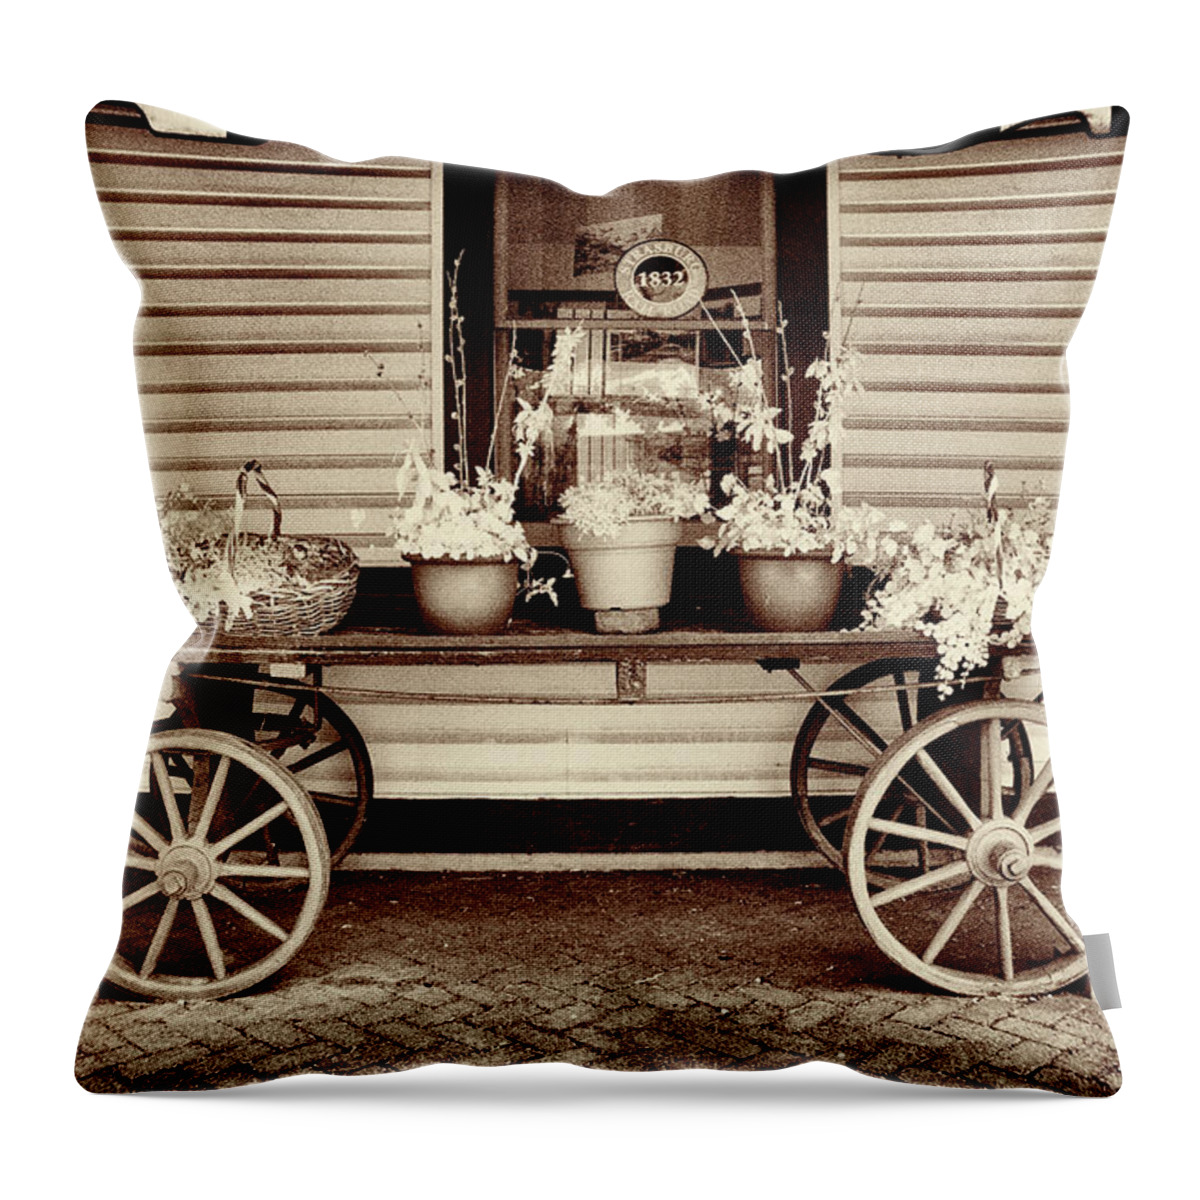 Dir-rr-0836-c Throw Pillow featuring the photograph New Life for Old Luggage cart by Paul W Faust - Impressions of Light